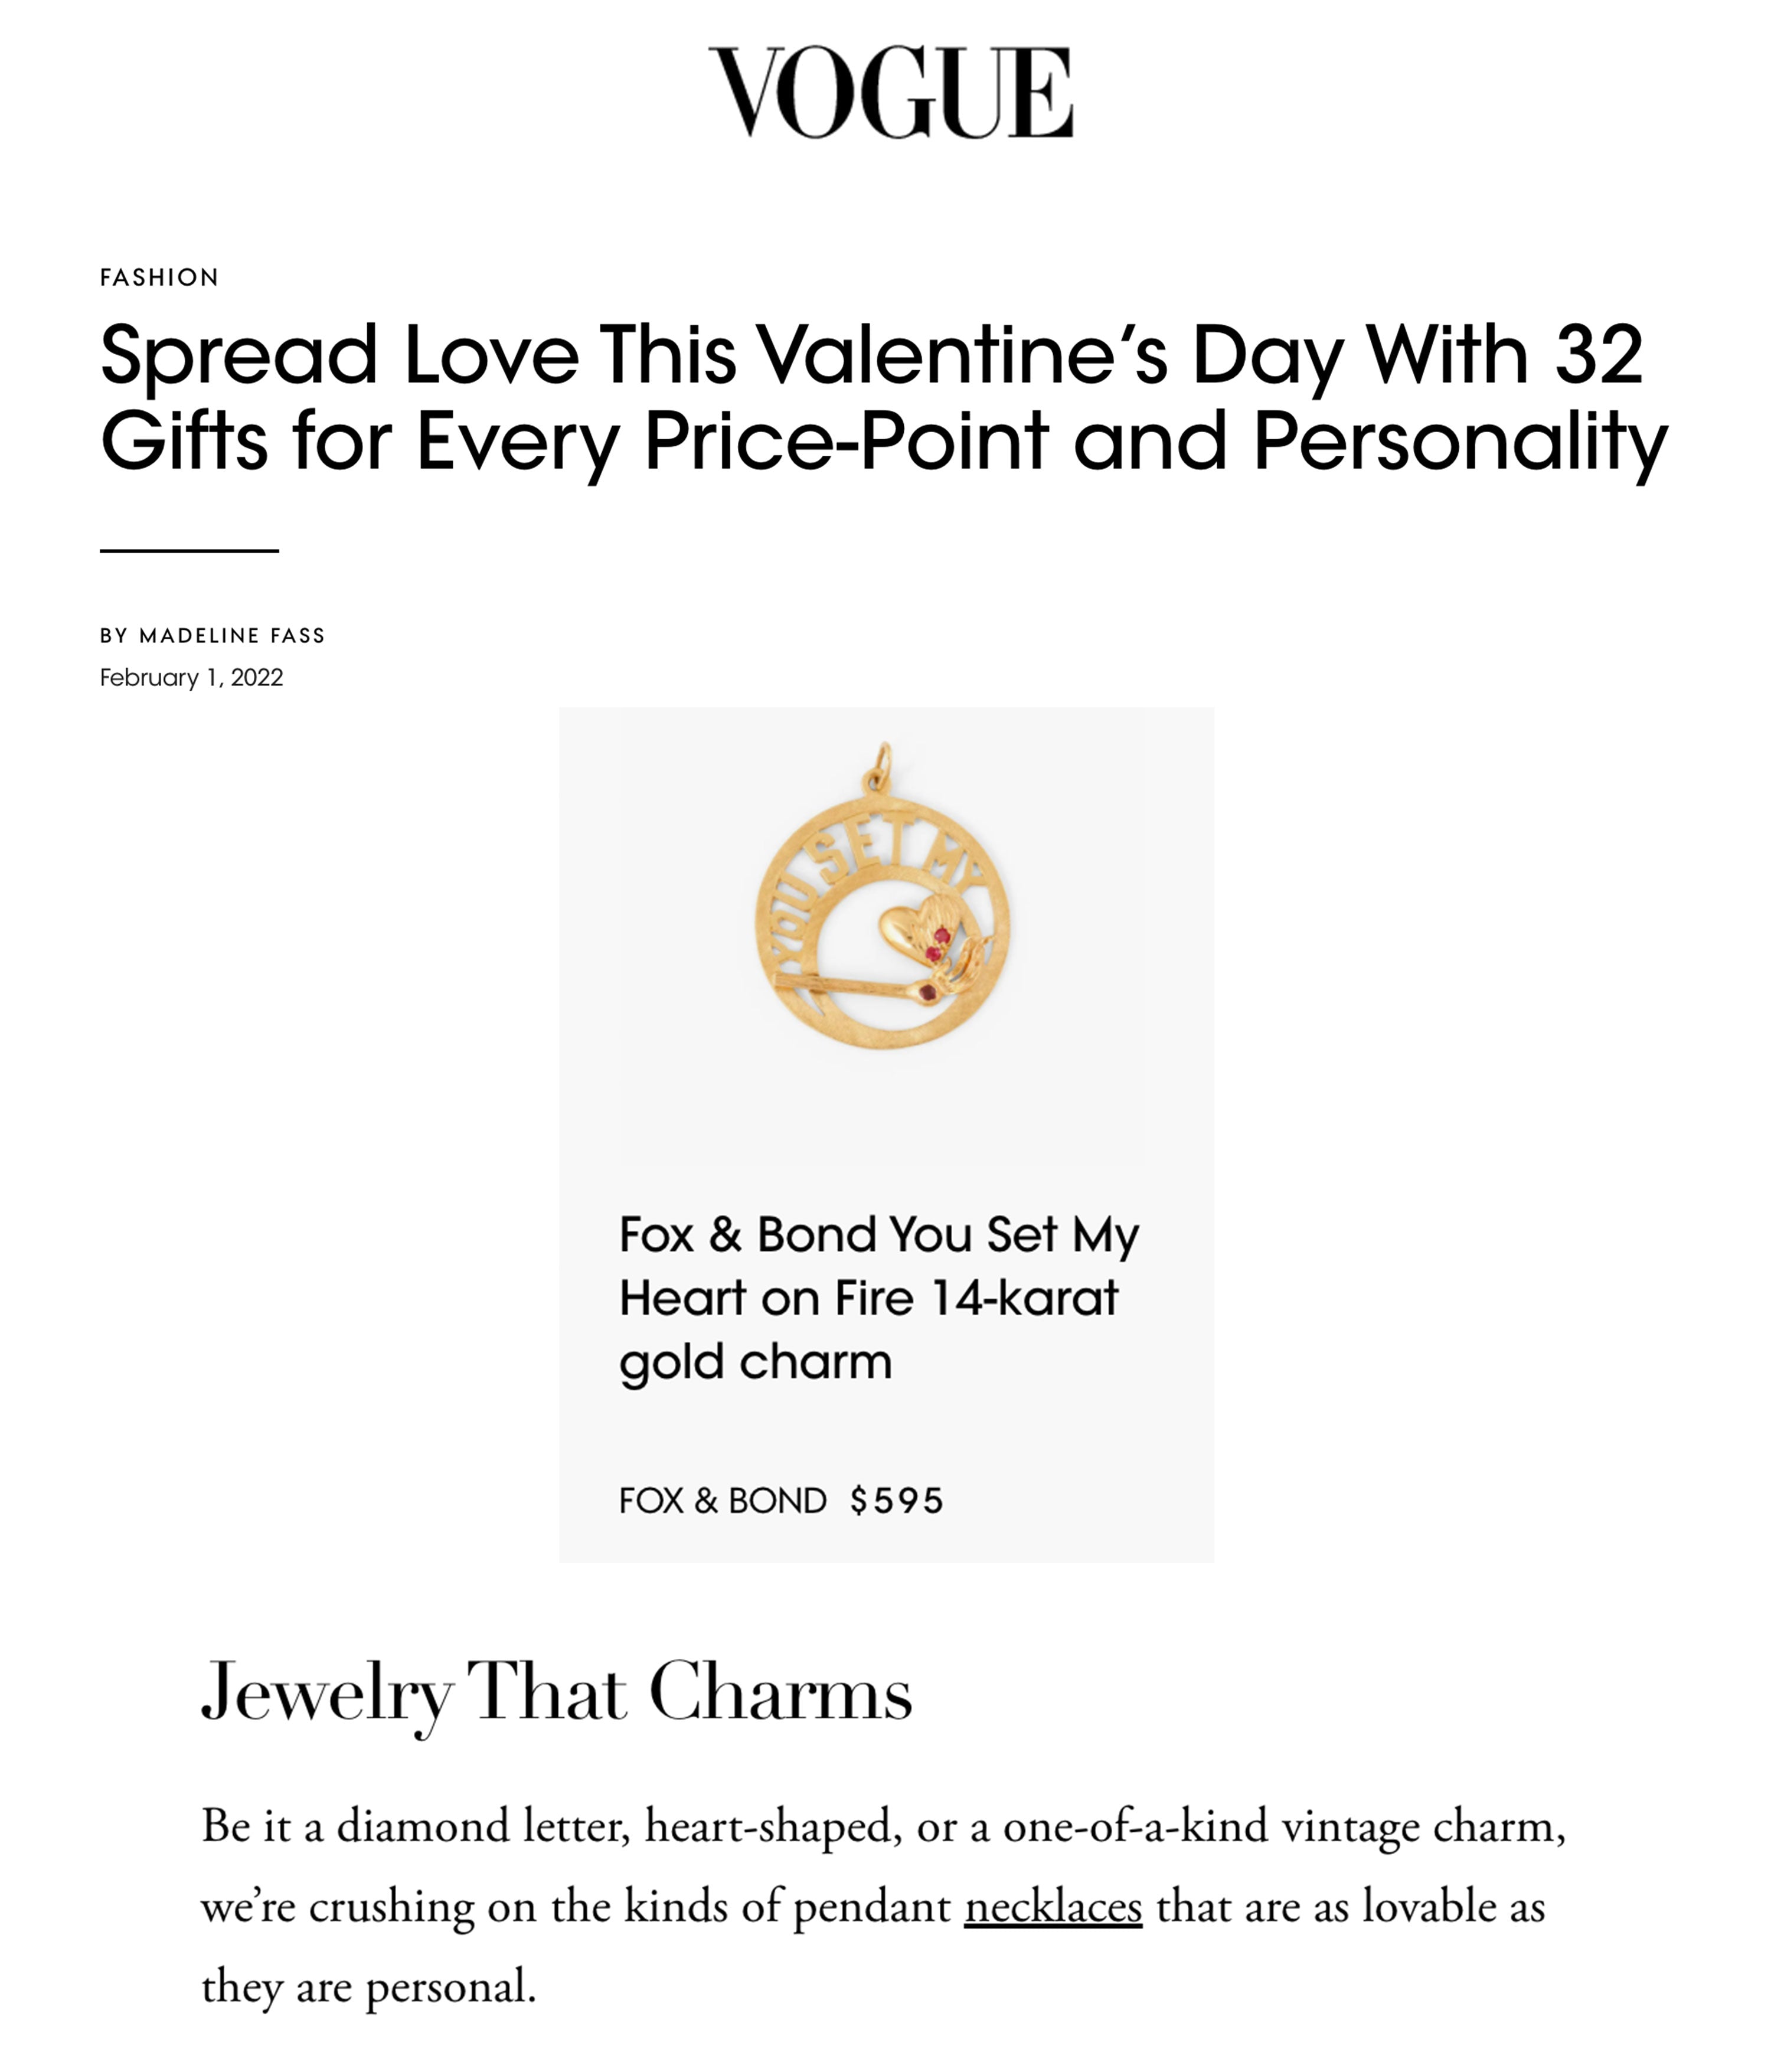 Vogue.com: Spread Love This Valentine’s Day With 32 Gifts